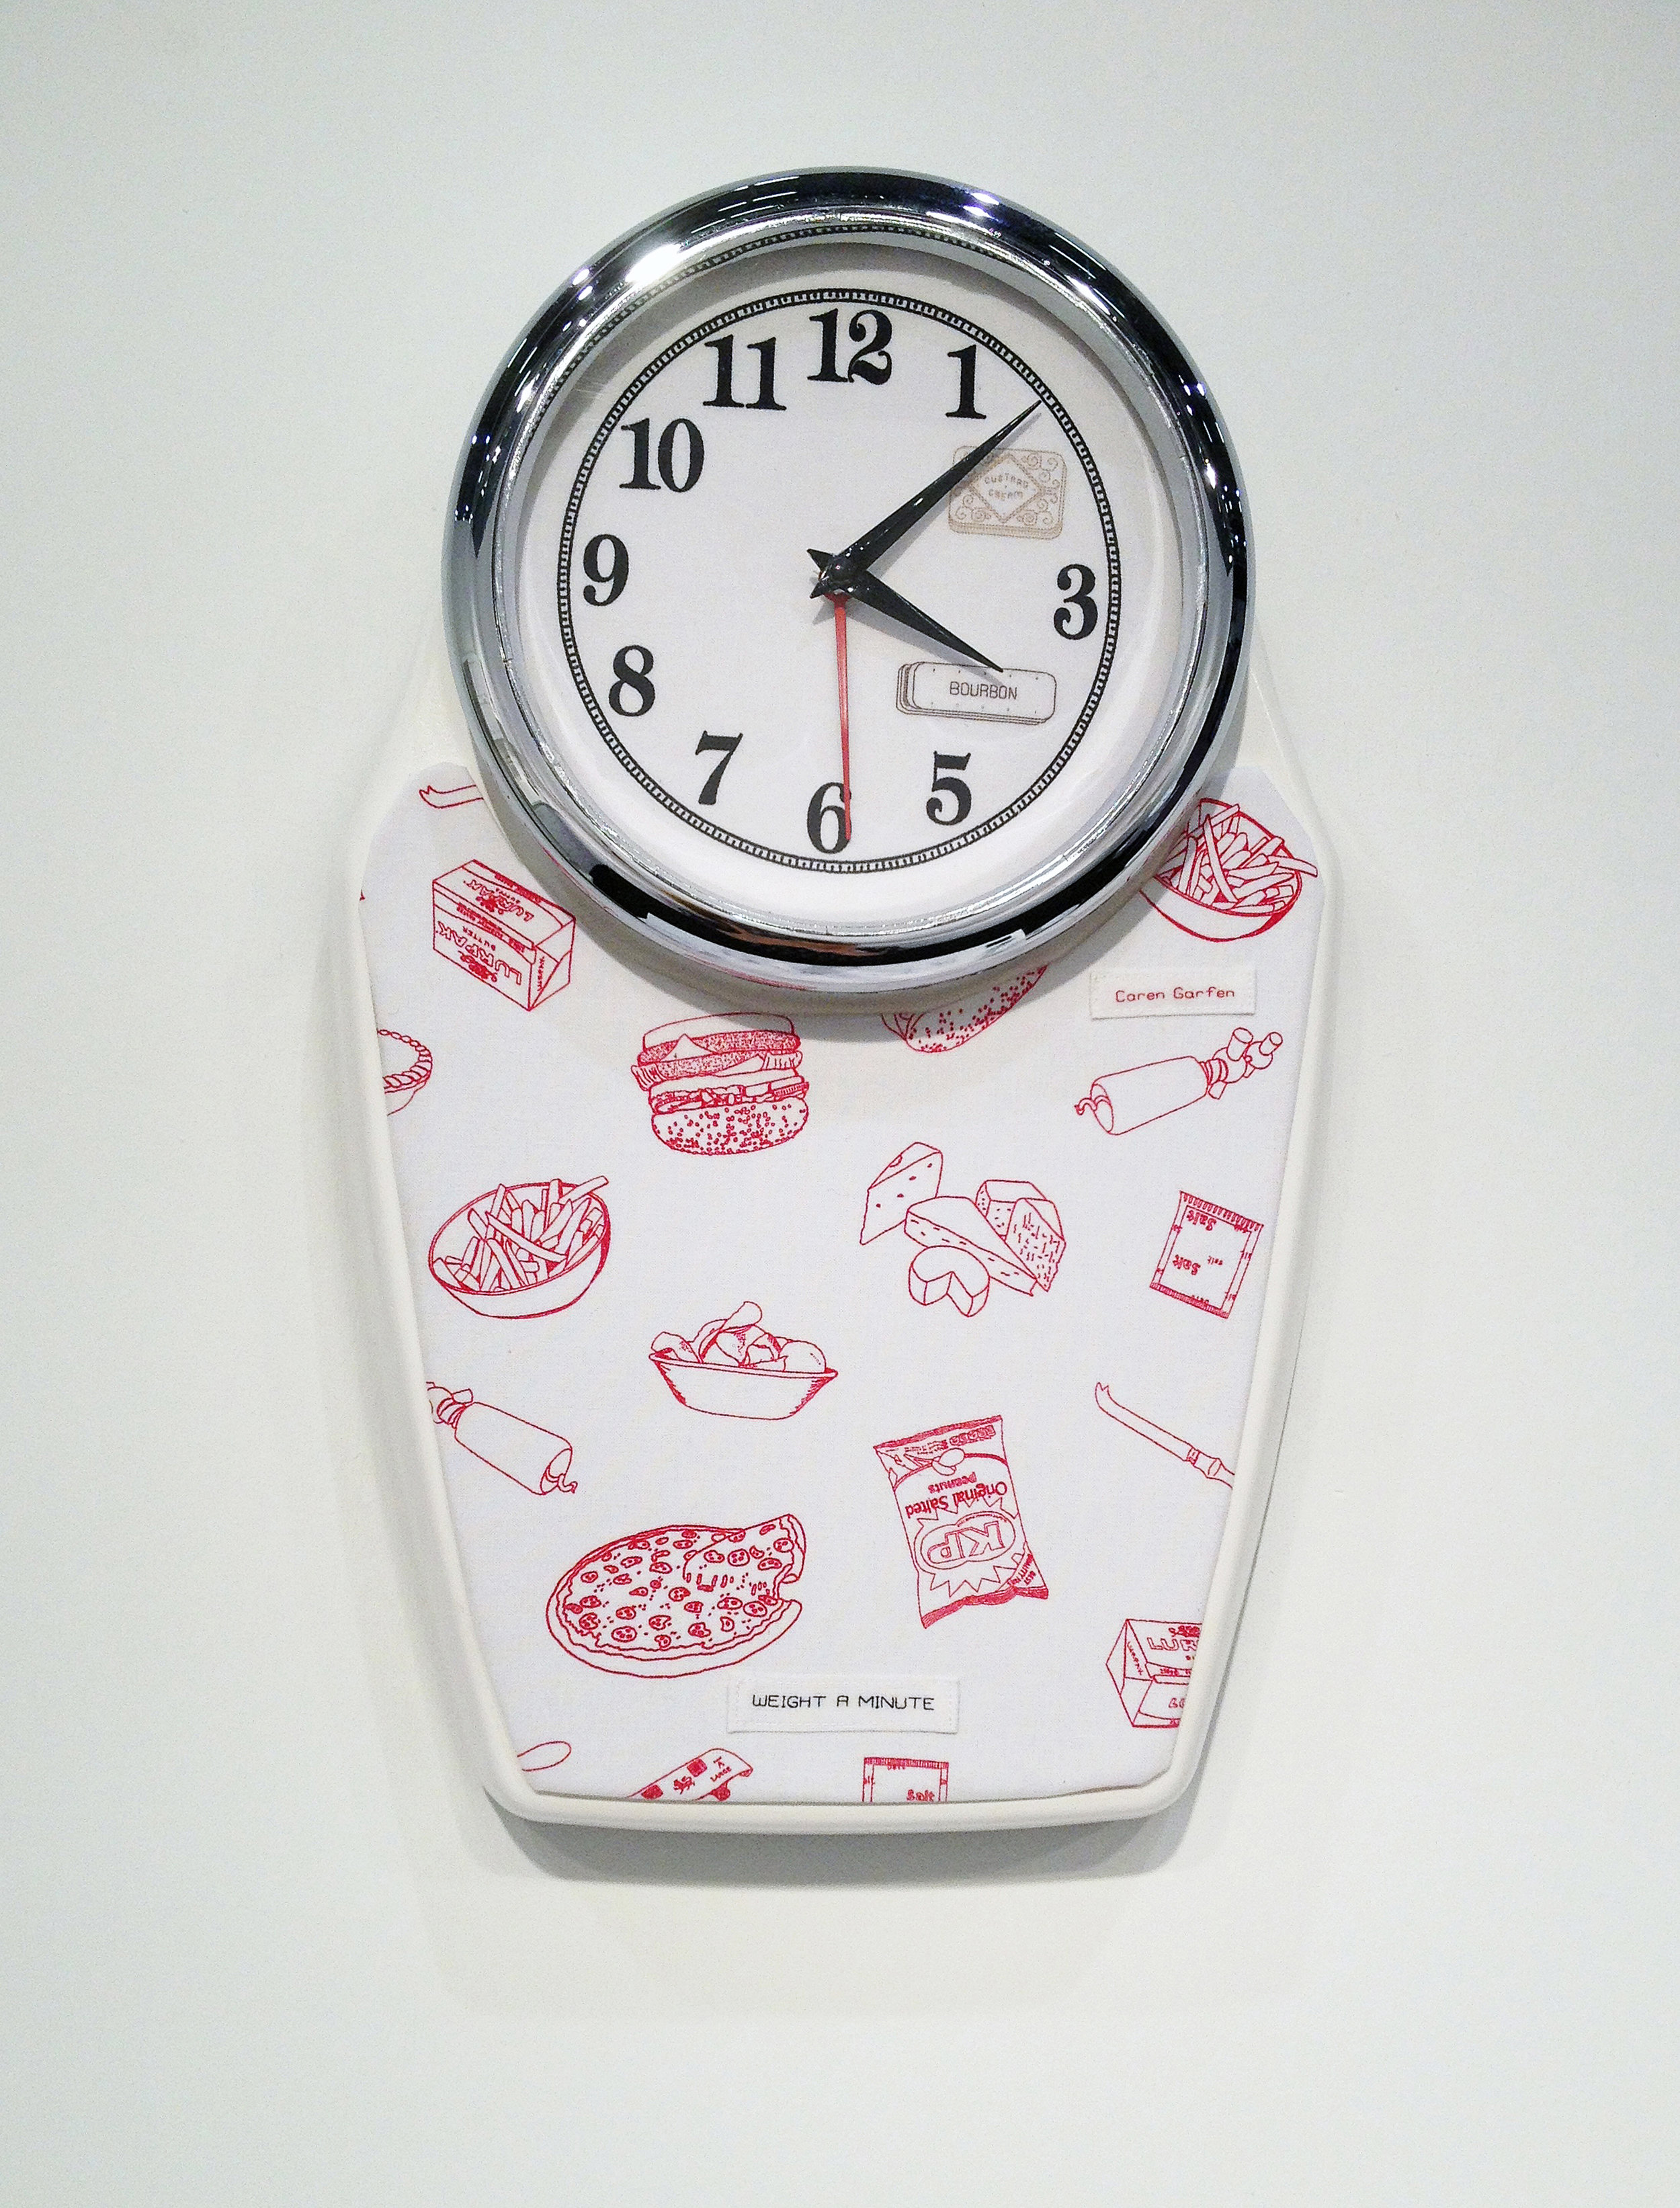 Weight A Minute, 2014